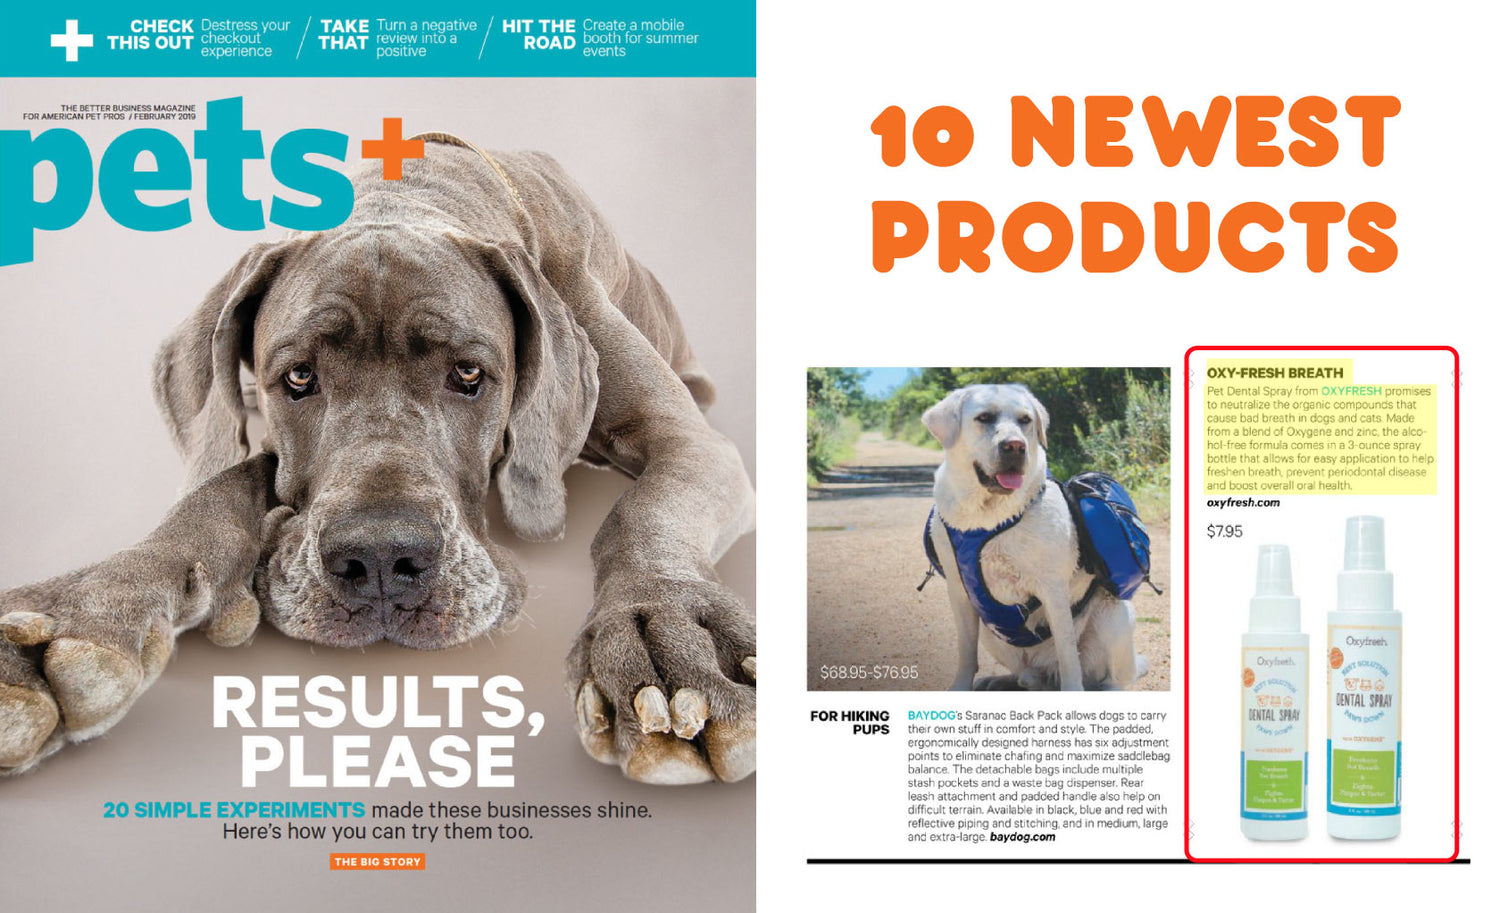 Oxyfresh Featured in Pets Plus Magazine!